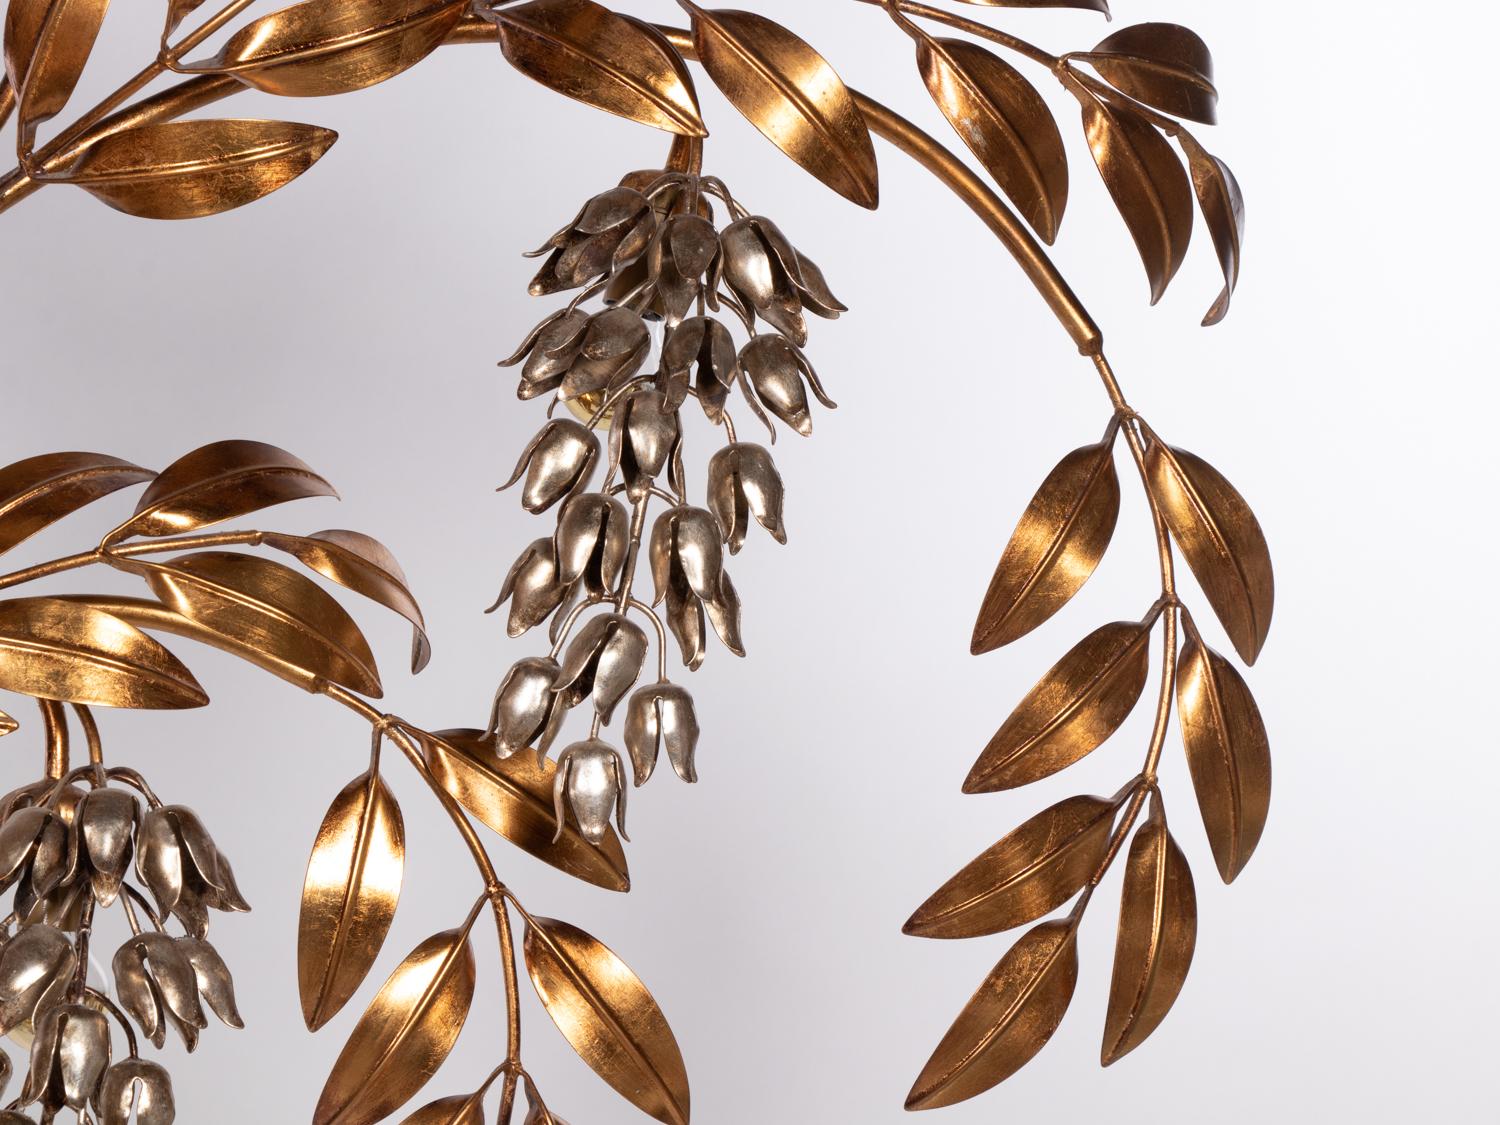 Monumental 'Pioggia D'oro' wall light made by Hans Kögl in Germany in the 1970s.
Large gold-plated leaved branches with hanging silver wisteria flowers.

Measures: width. 51